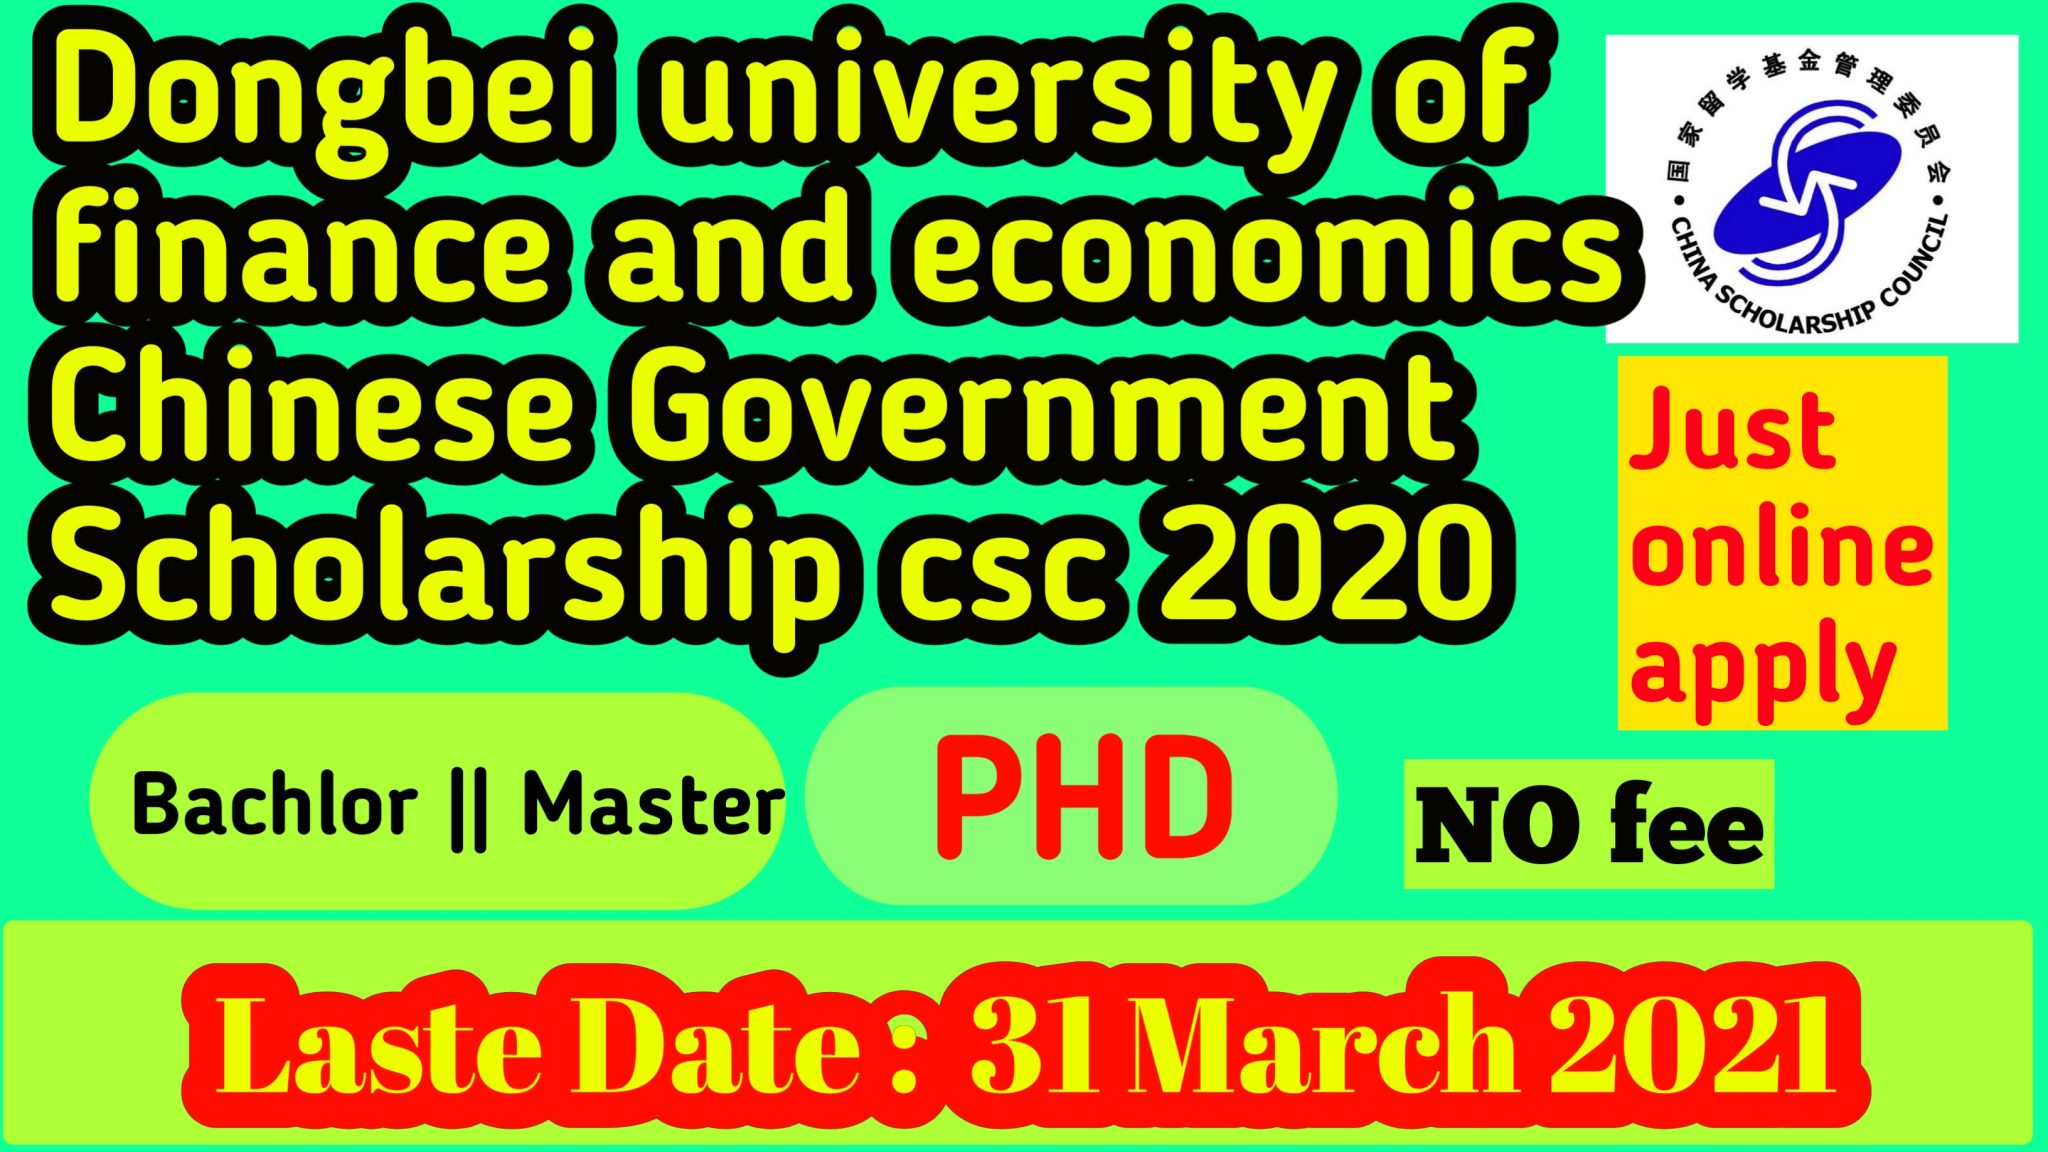 dongbai university of fincance and economics csc guide official